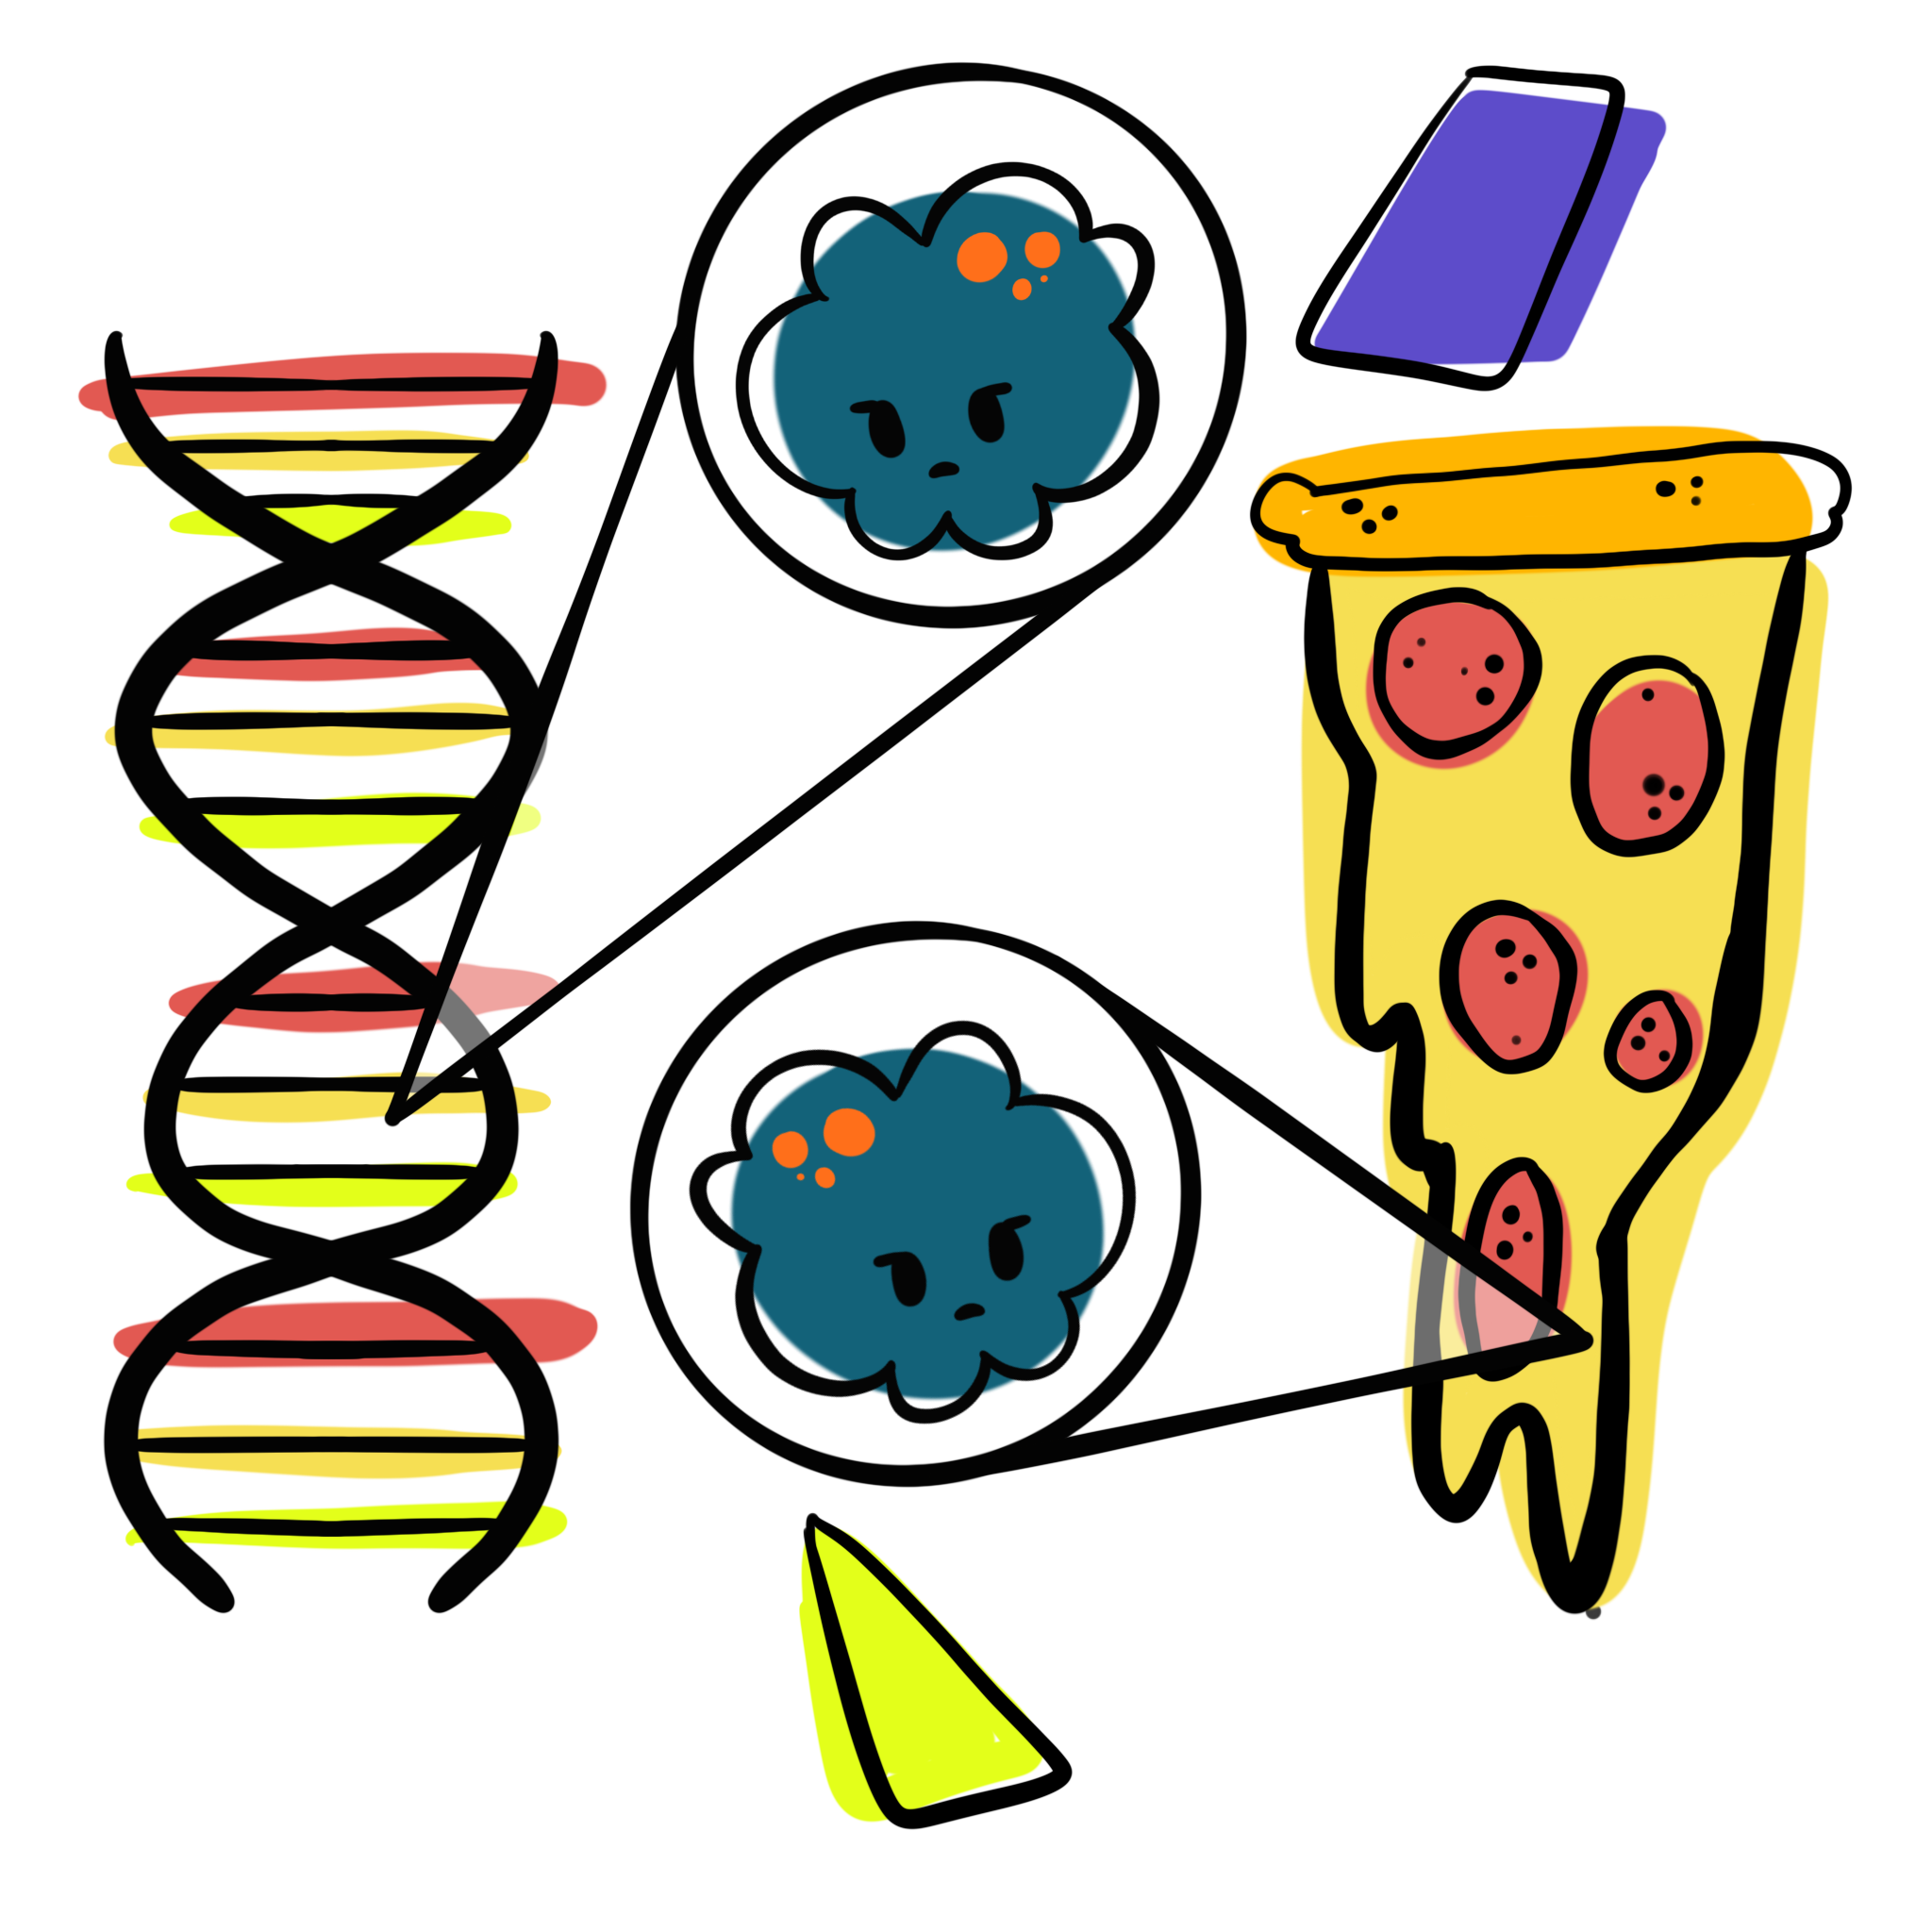 Illustration of DNA with cholesterol characters and examples of bad food.